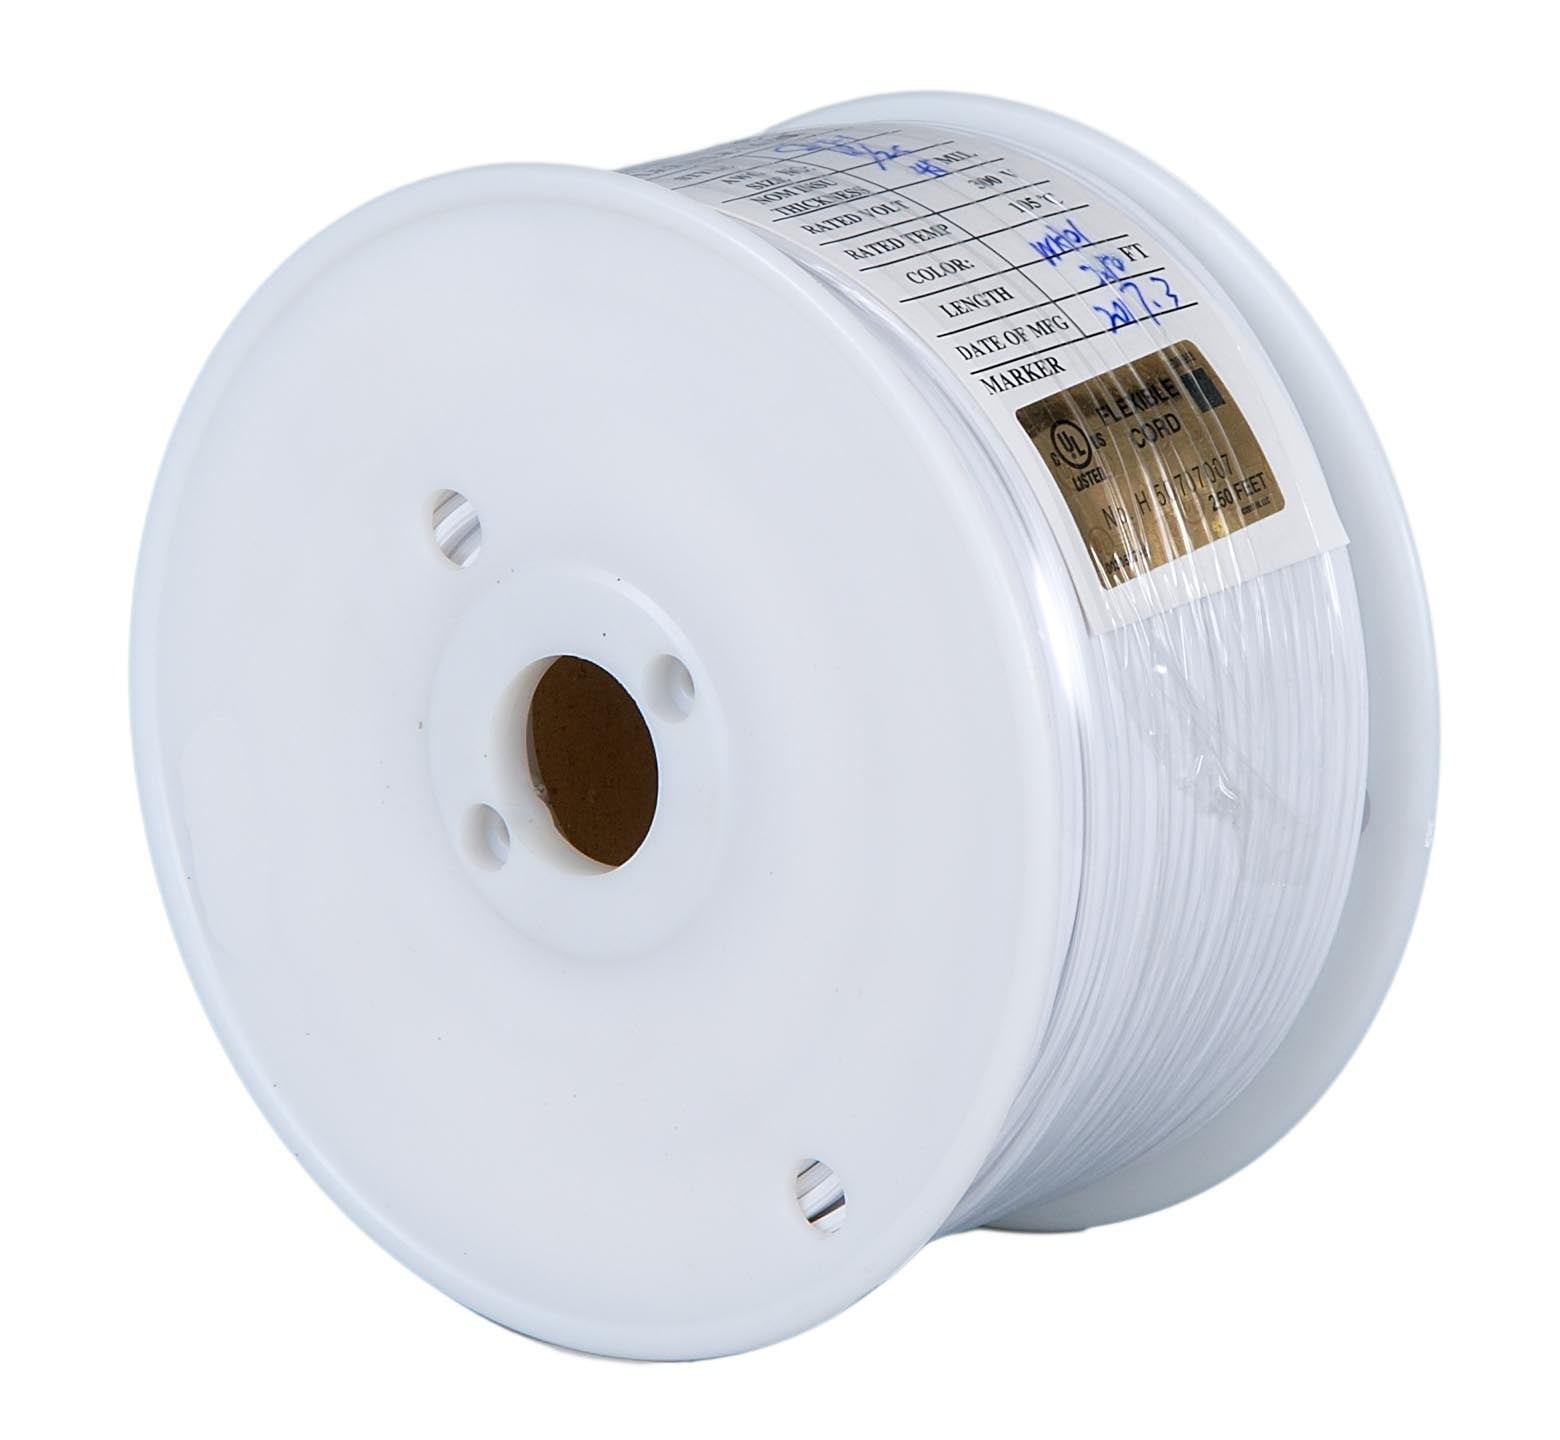 B&p Lamp Clear Silver, 250 ft. Spool, Plastic 18/2 Lamp Cord, SPT-1 Size